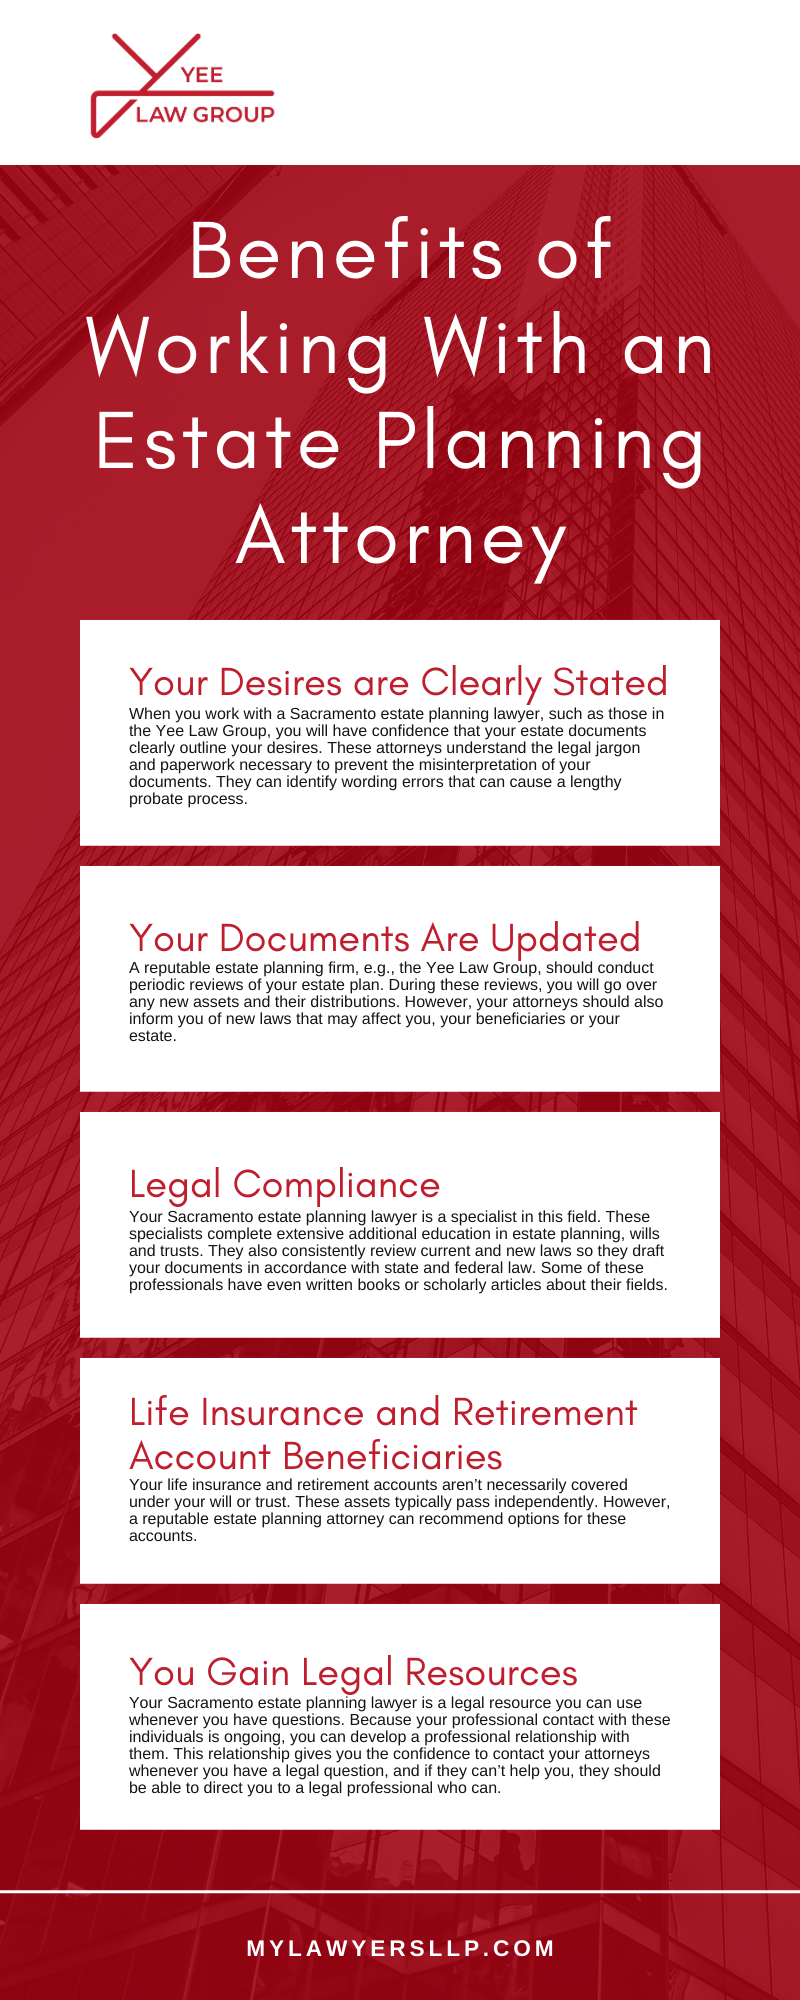 Benefits of Working With an Estate Planning Attorney Infographic